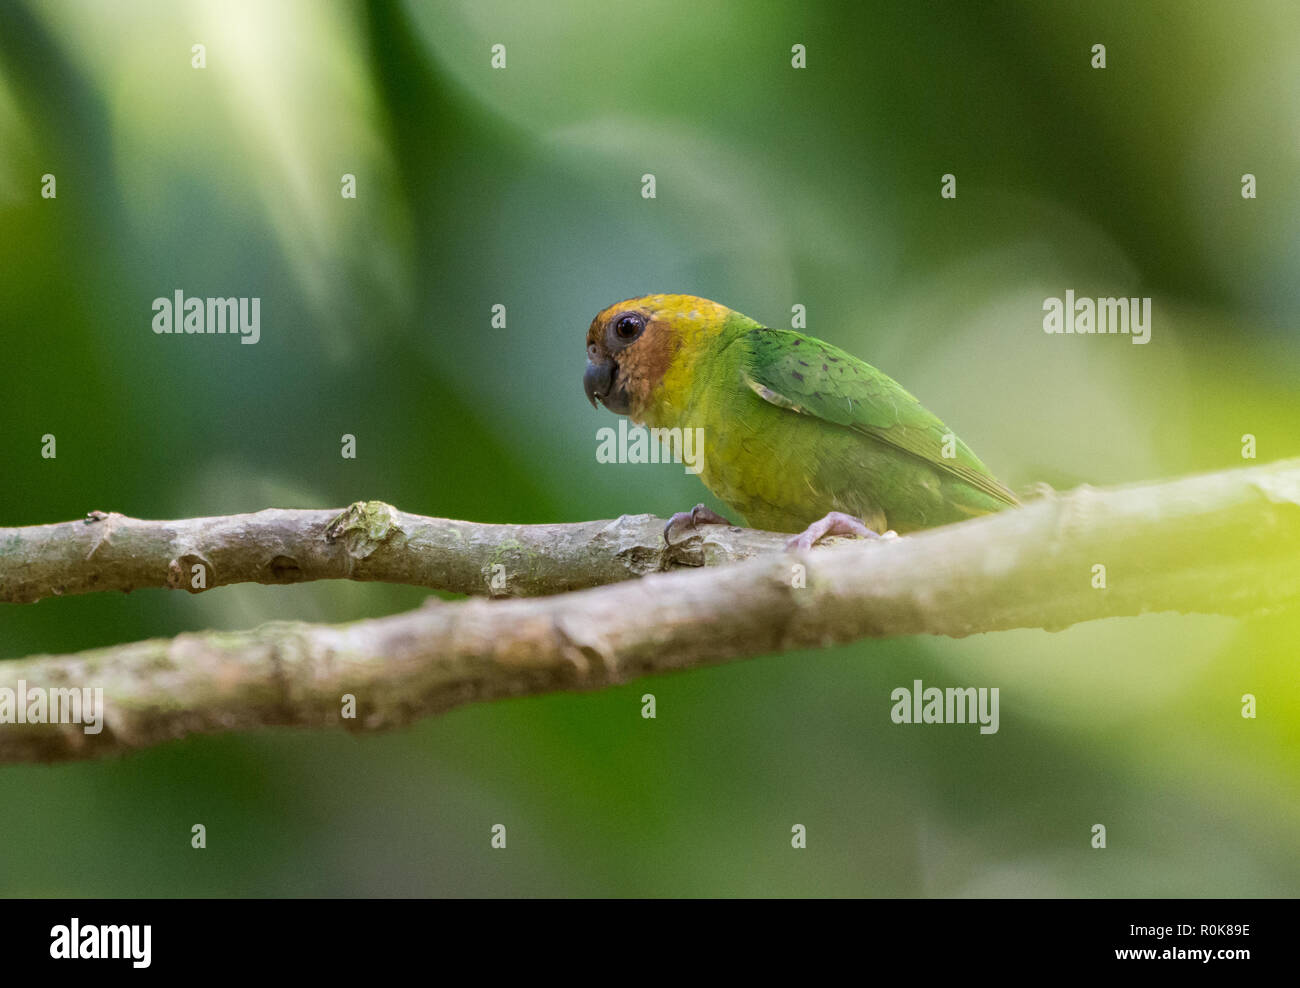 Buff-faced Pygmy-Parrot (Micropsitta pusio) is the smallest parrot in the world. Nimbokrong, Papua, Indonesia. Stock Photo